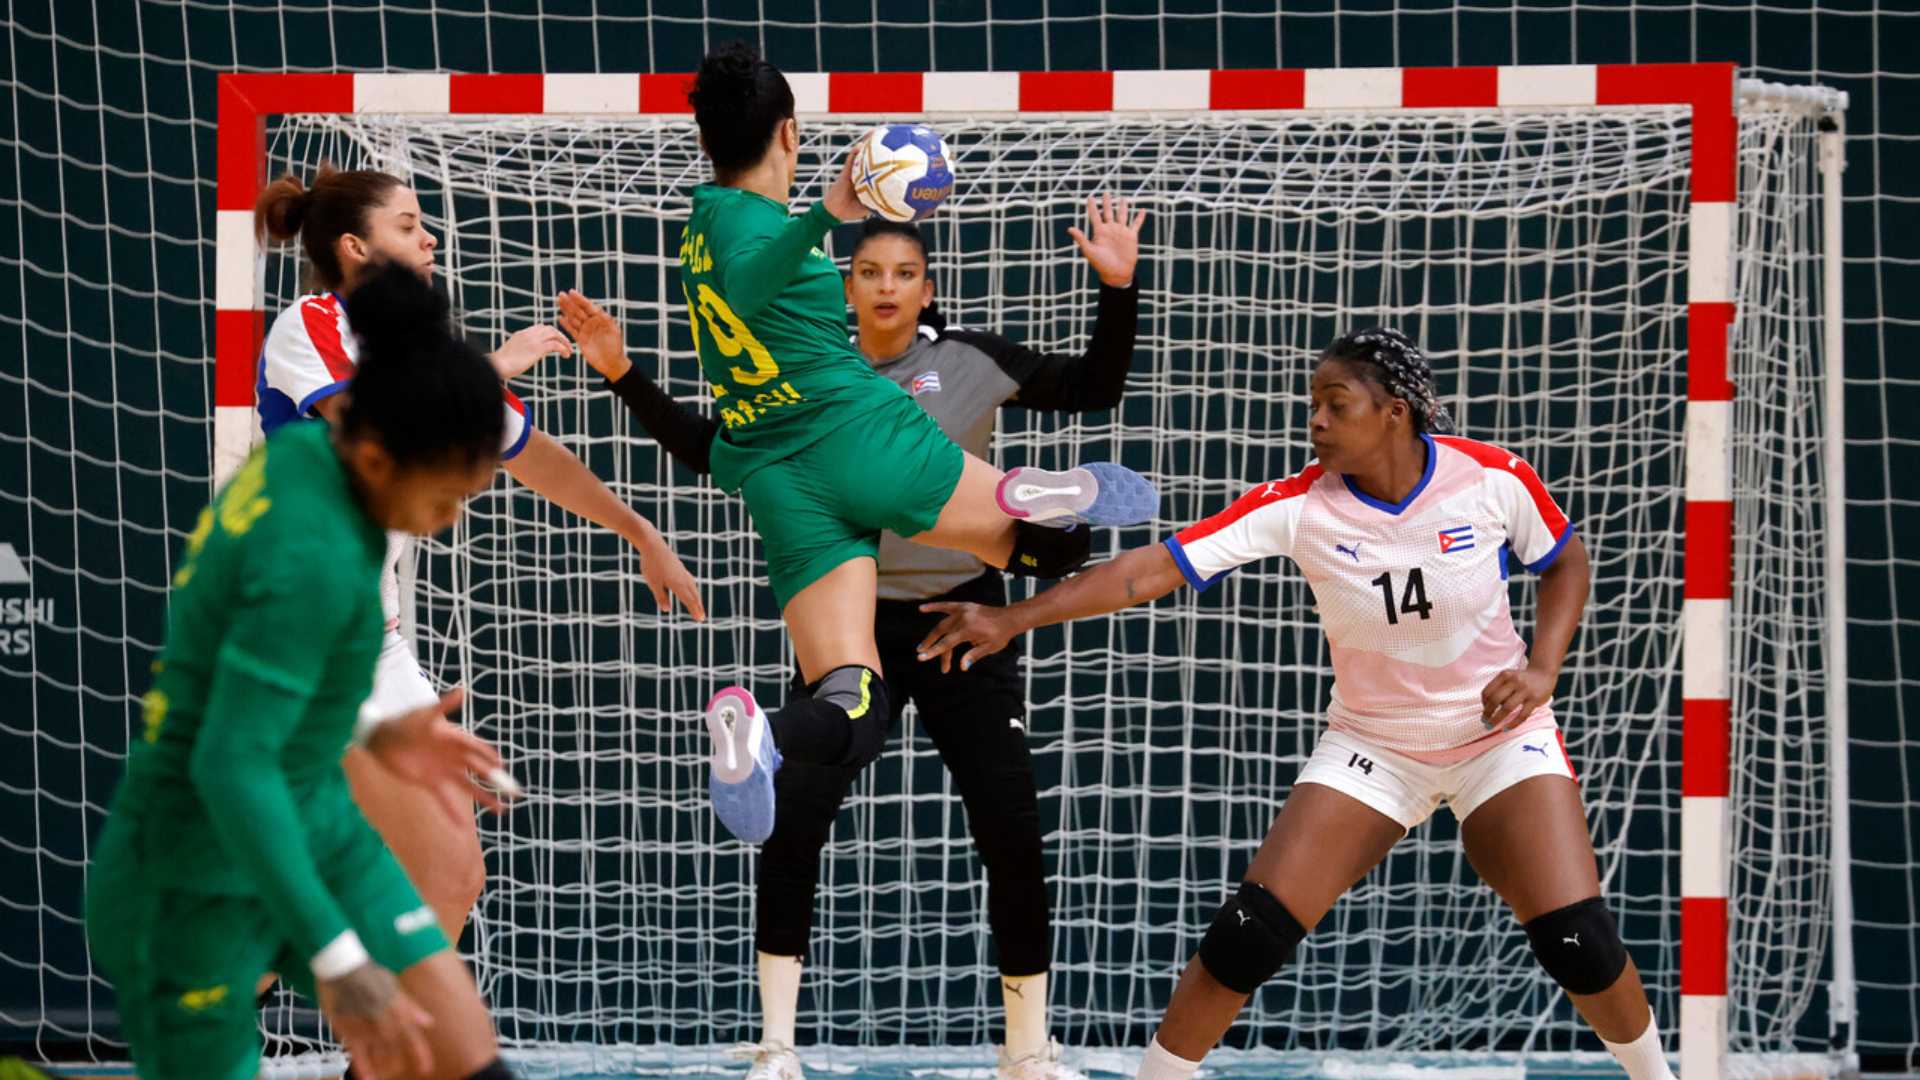 Handball: Brazil qualifies for the semifinals with a crushing perfect victory